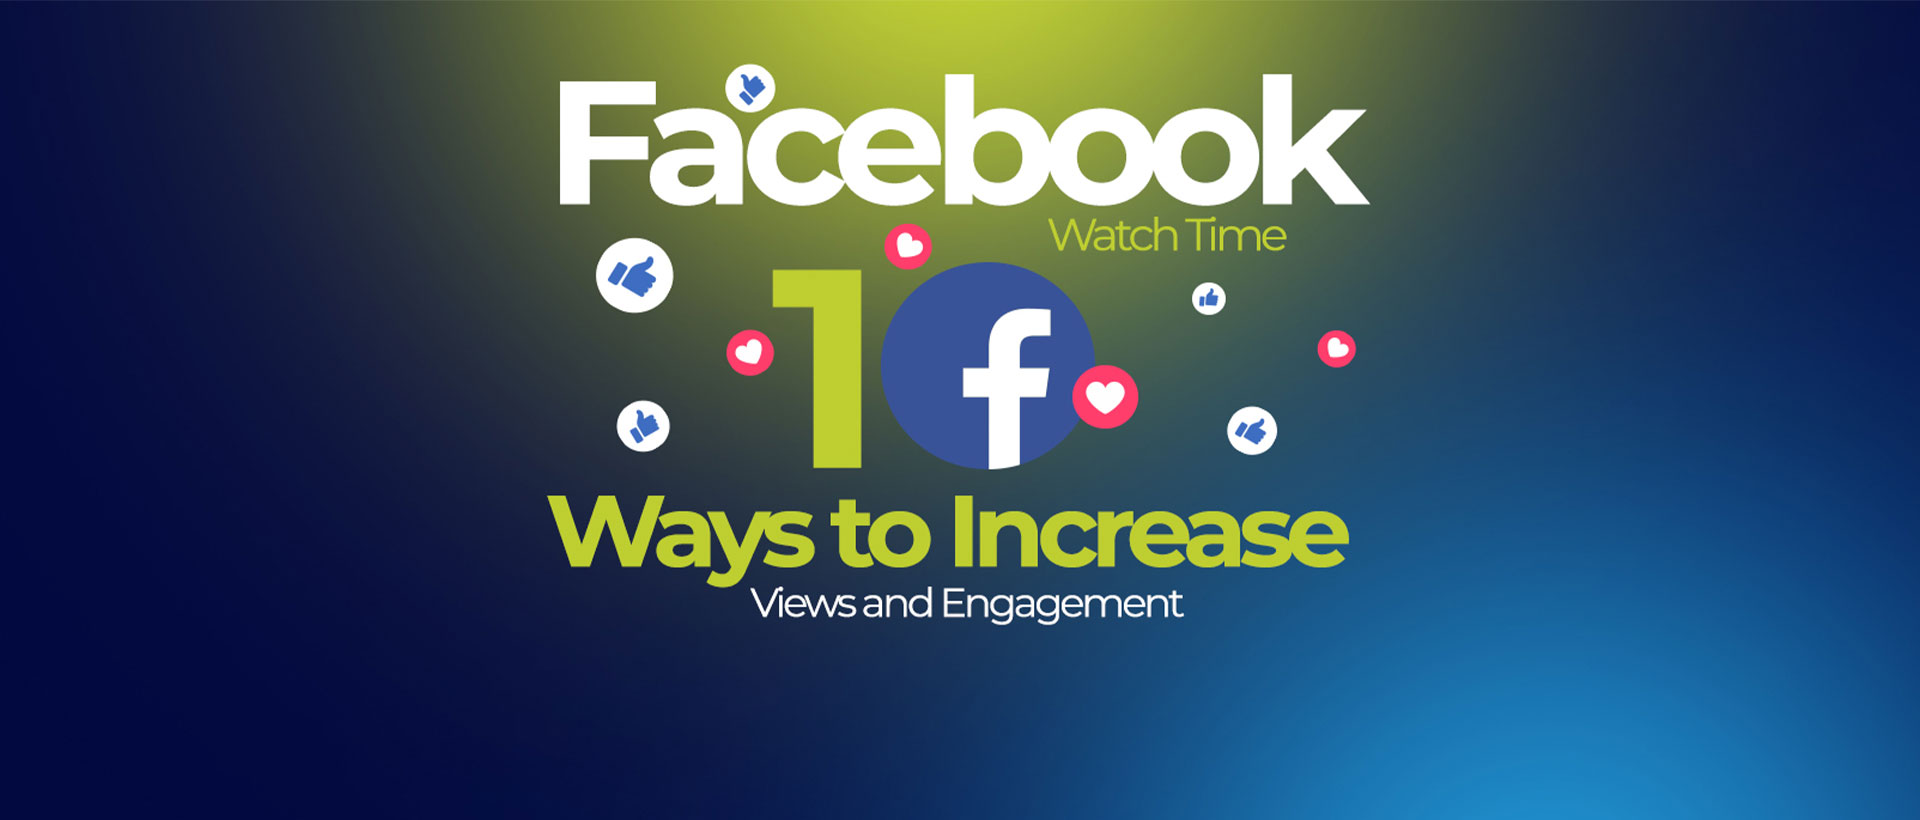 Facebook Watch Time: 1O Ways to Increase Views and Engagement